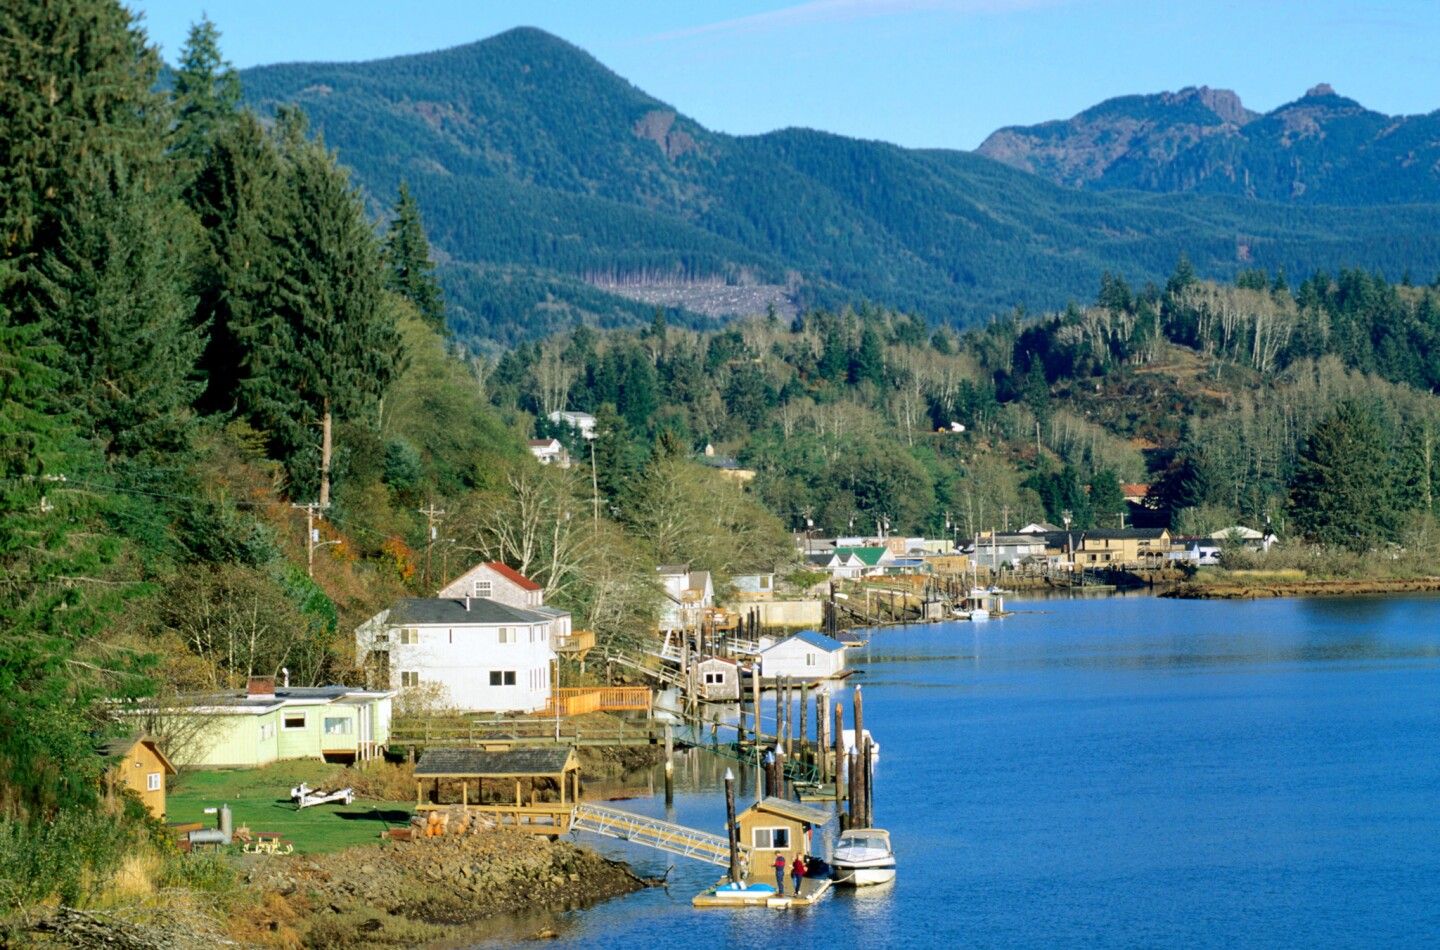 Peaks rise above the small township reaching heights of 3,000 feet in Nehalem Bay, Ore.